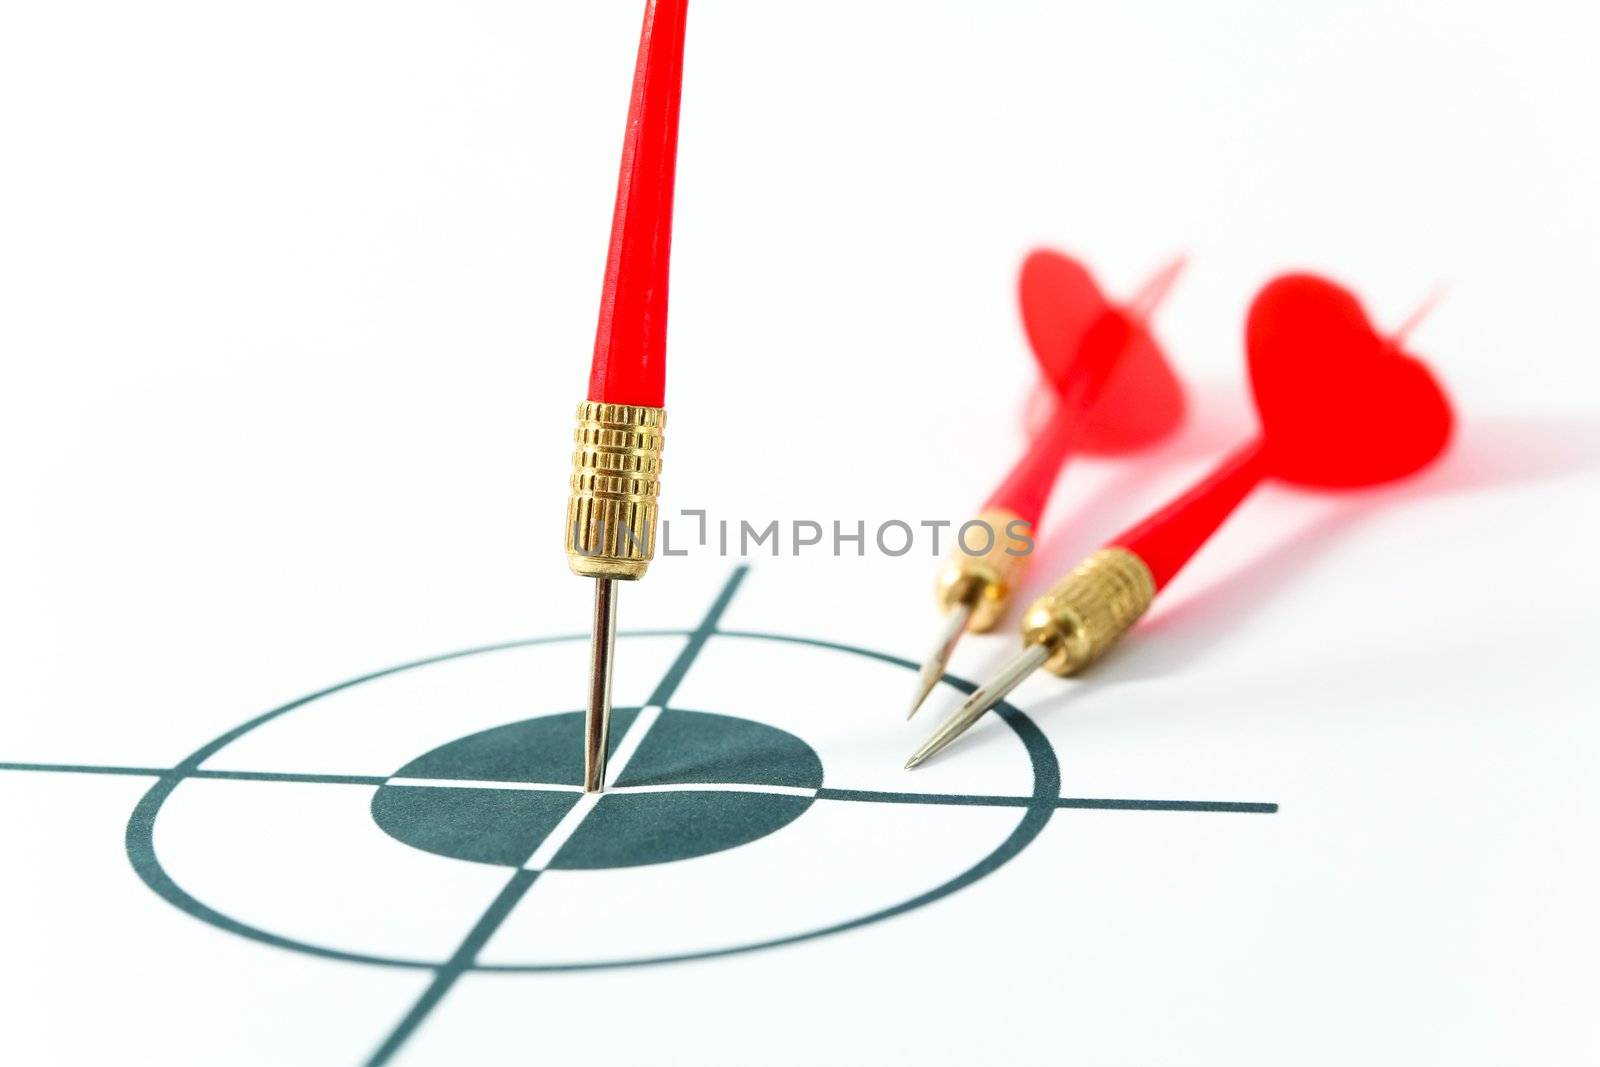 An image of tree darts and black target